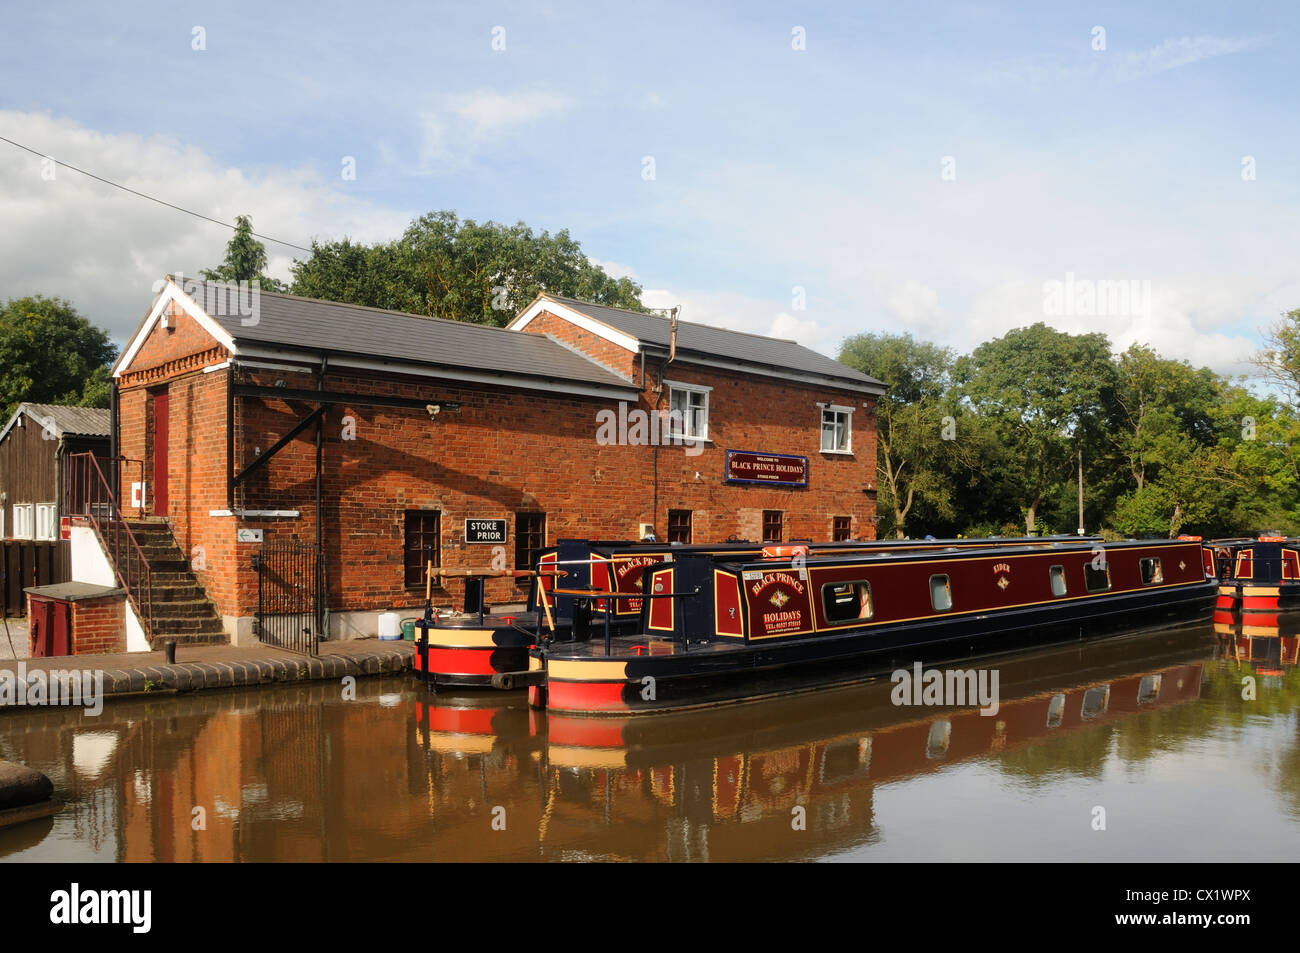 One of the bases of Black Prince Holidays, on the Worcester and Birmingham Canal at Stoke Prior, Worcestershire, England Stock Photo